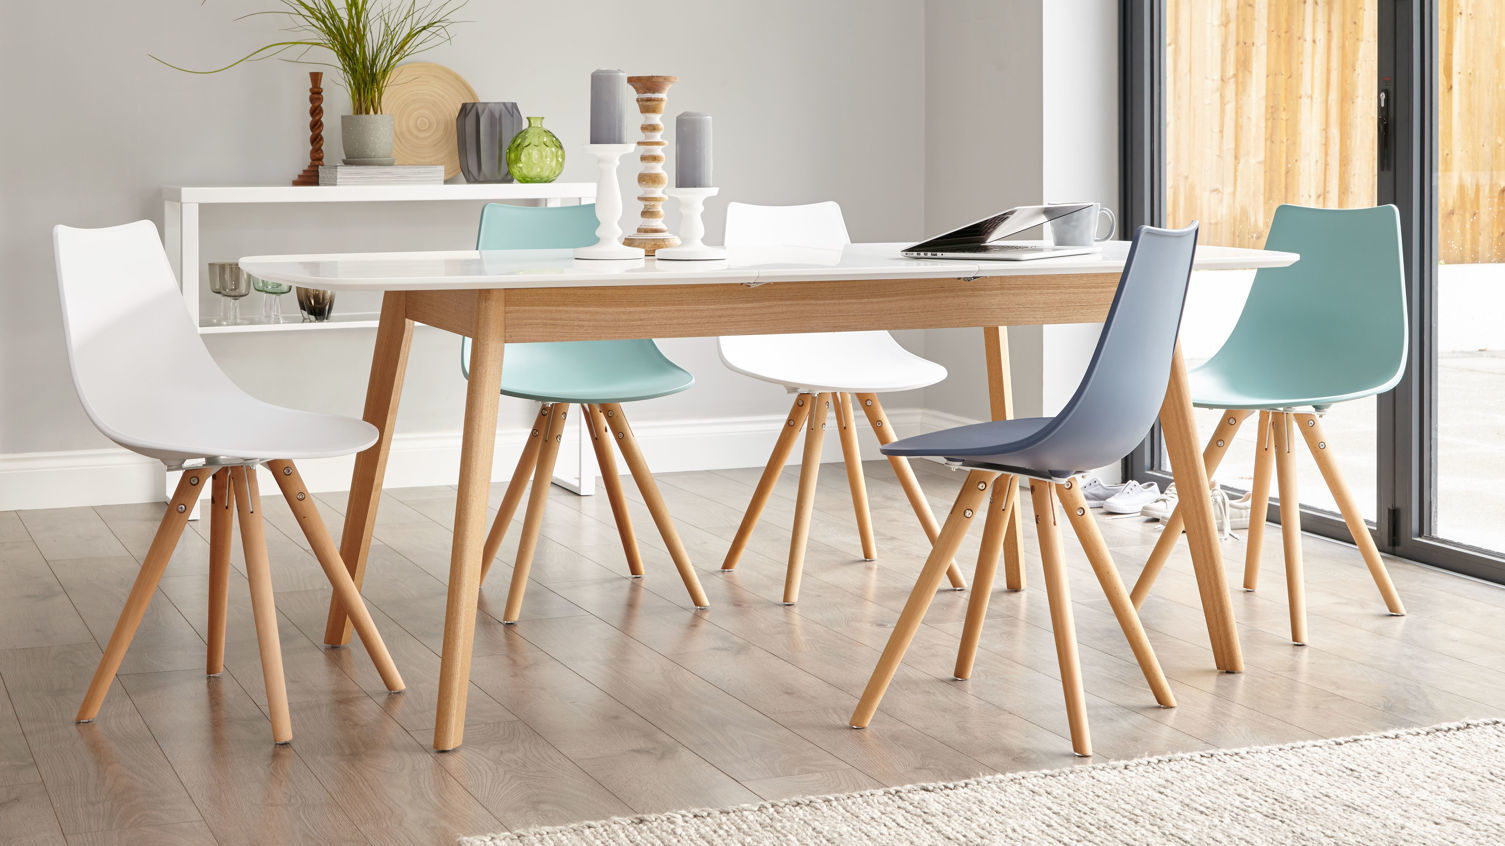 Buy the dining table that’s right for your lifestyle